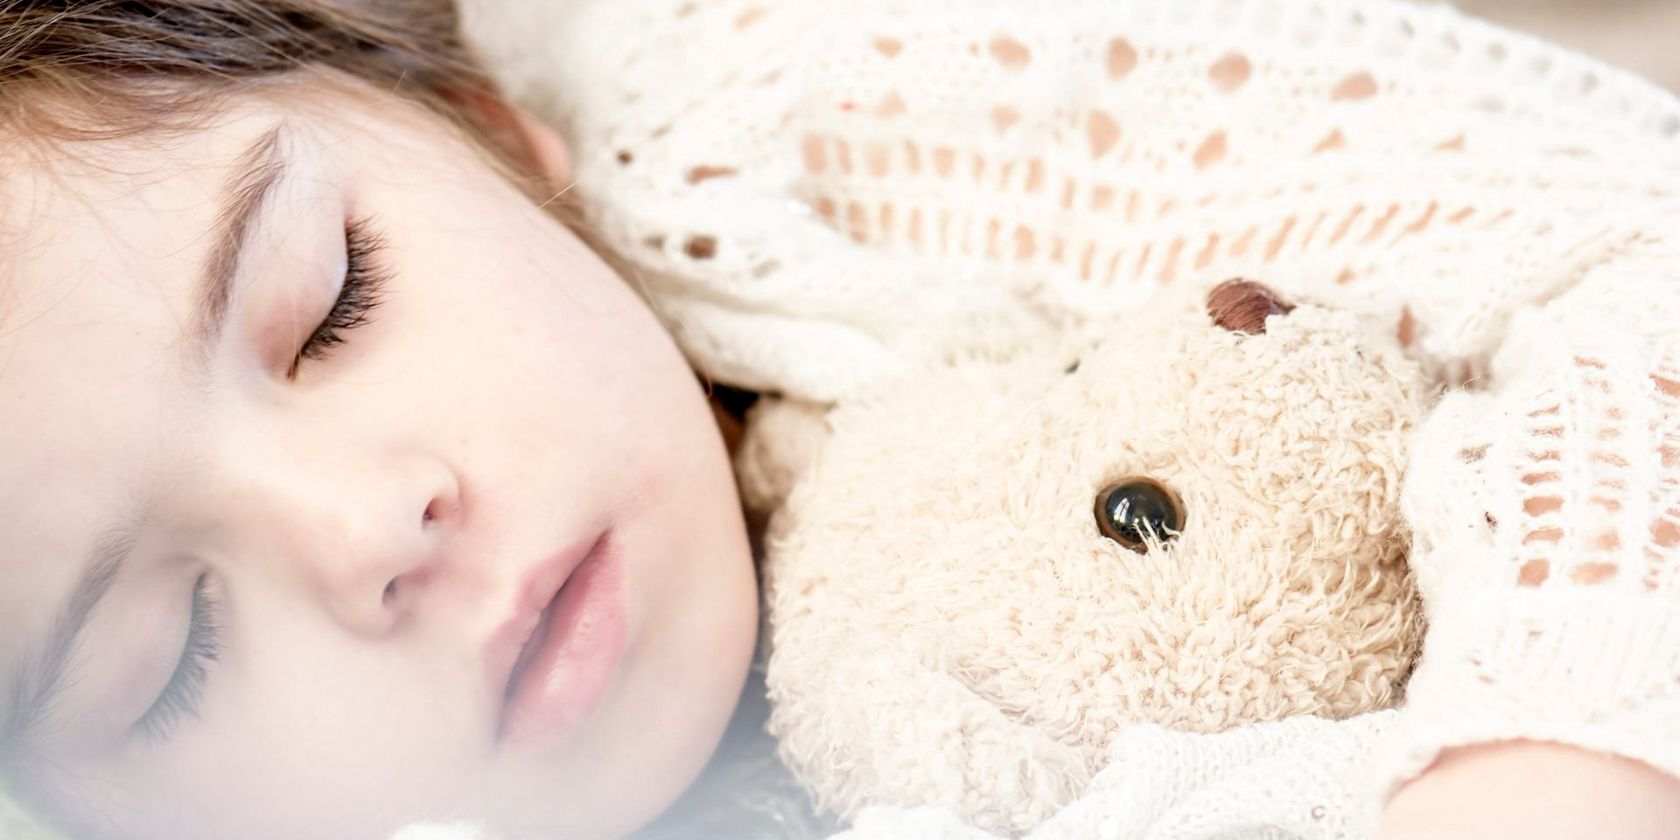 Photo showing a sleeping child holding a teddy bear